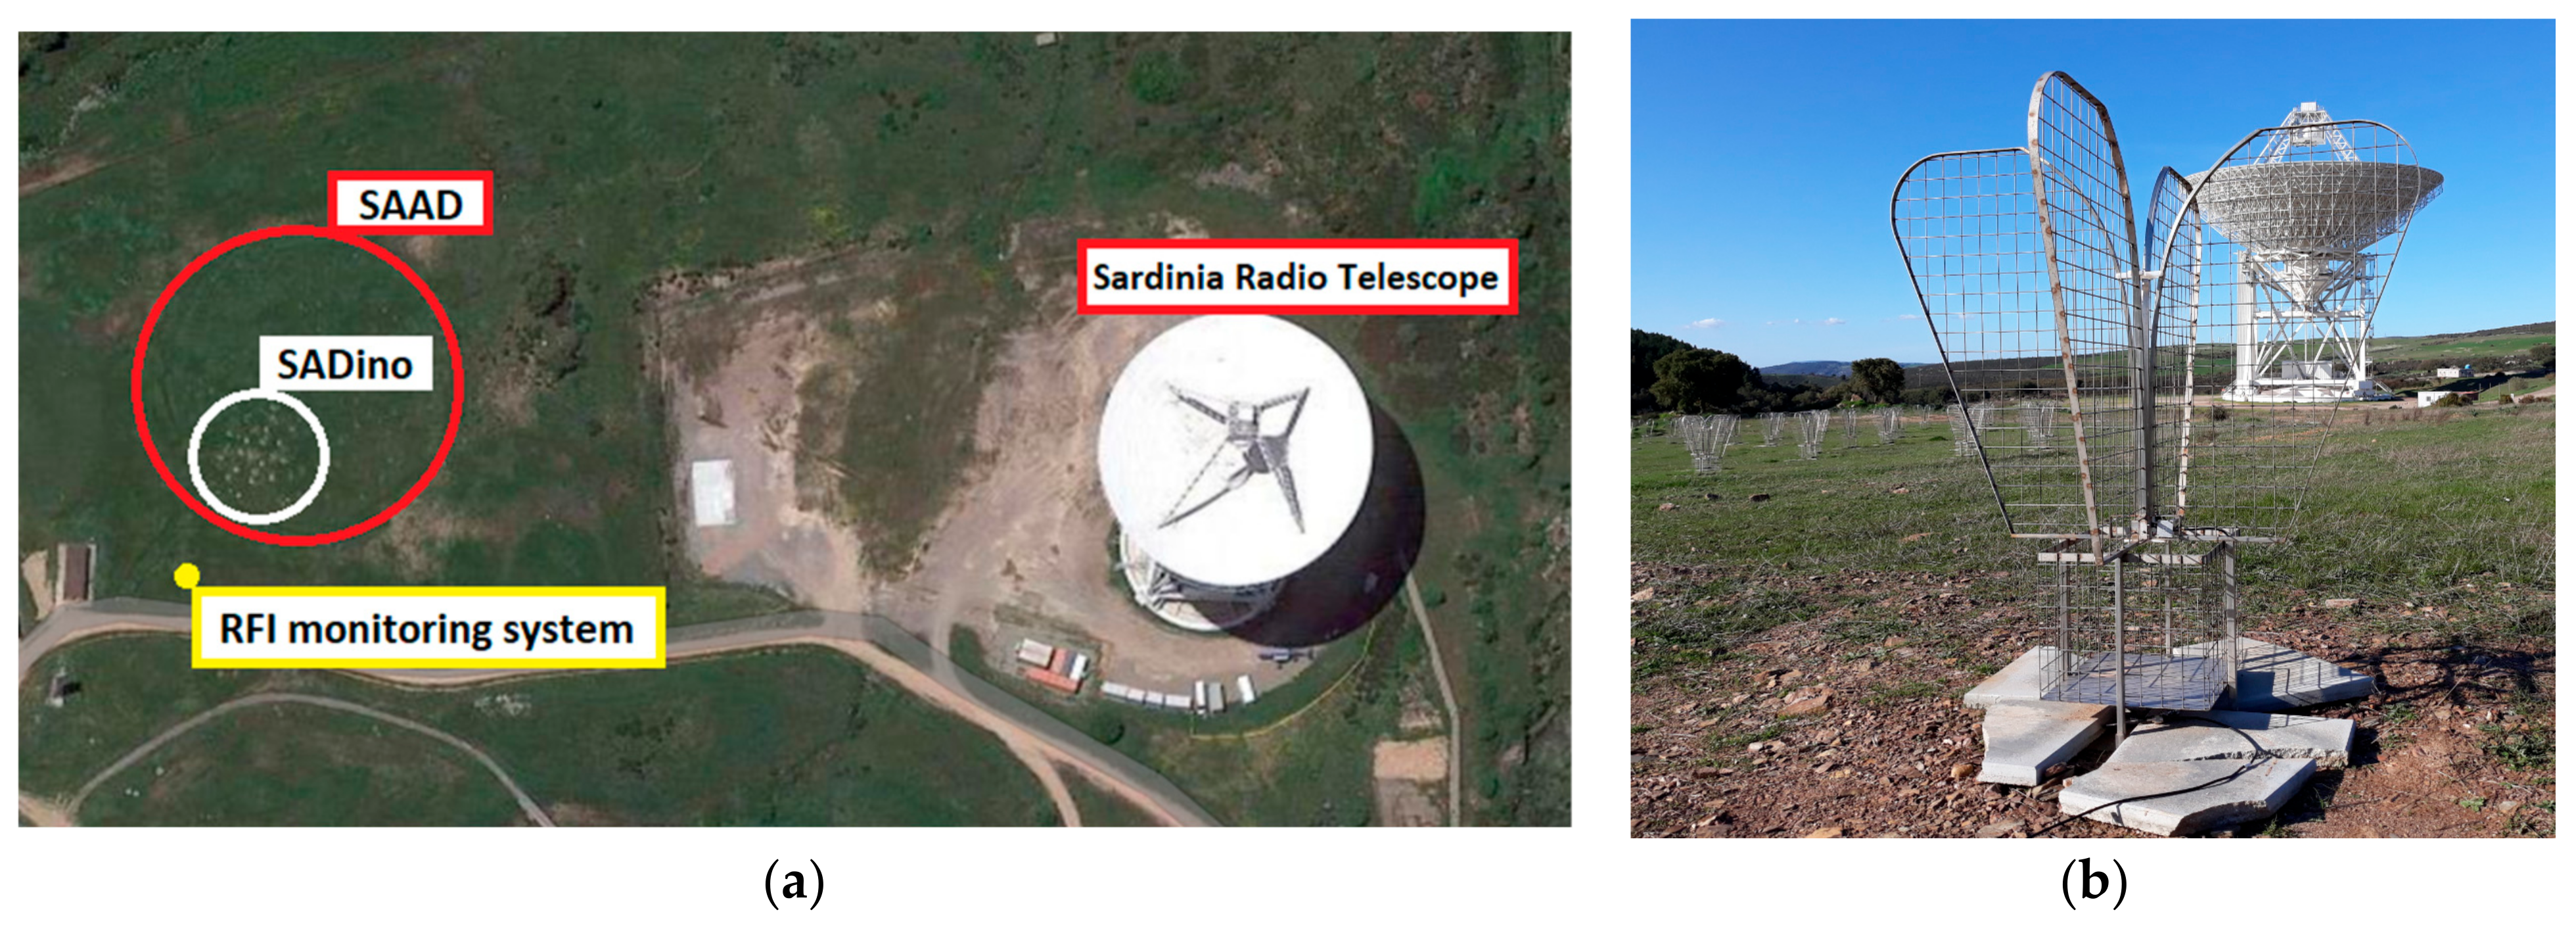 Sensors | Free Full-Text | Design, Implementation, and Characterization of  a Signal Acquisition Chain for SADino: The Precursor of the Italian  Low-Frequency Telescope Named the Sardinia Aperture Array Demonstrator  (SAAD)